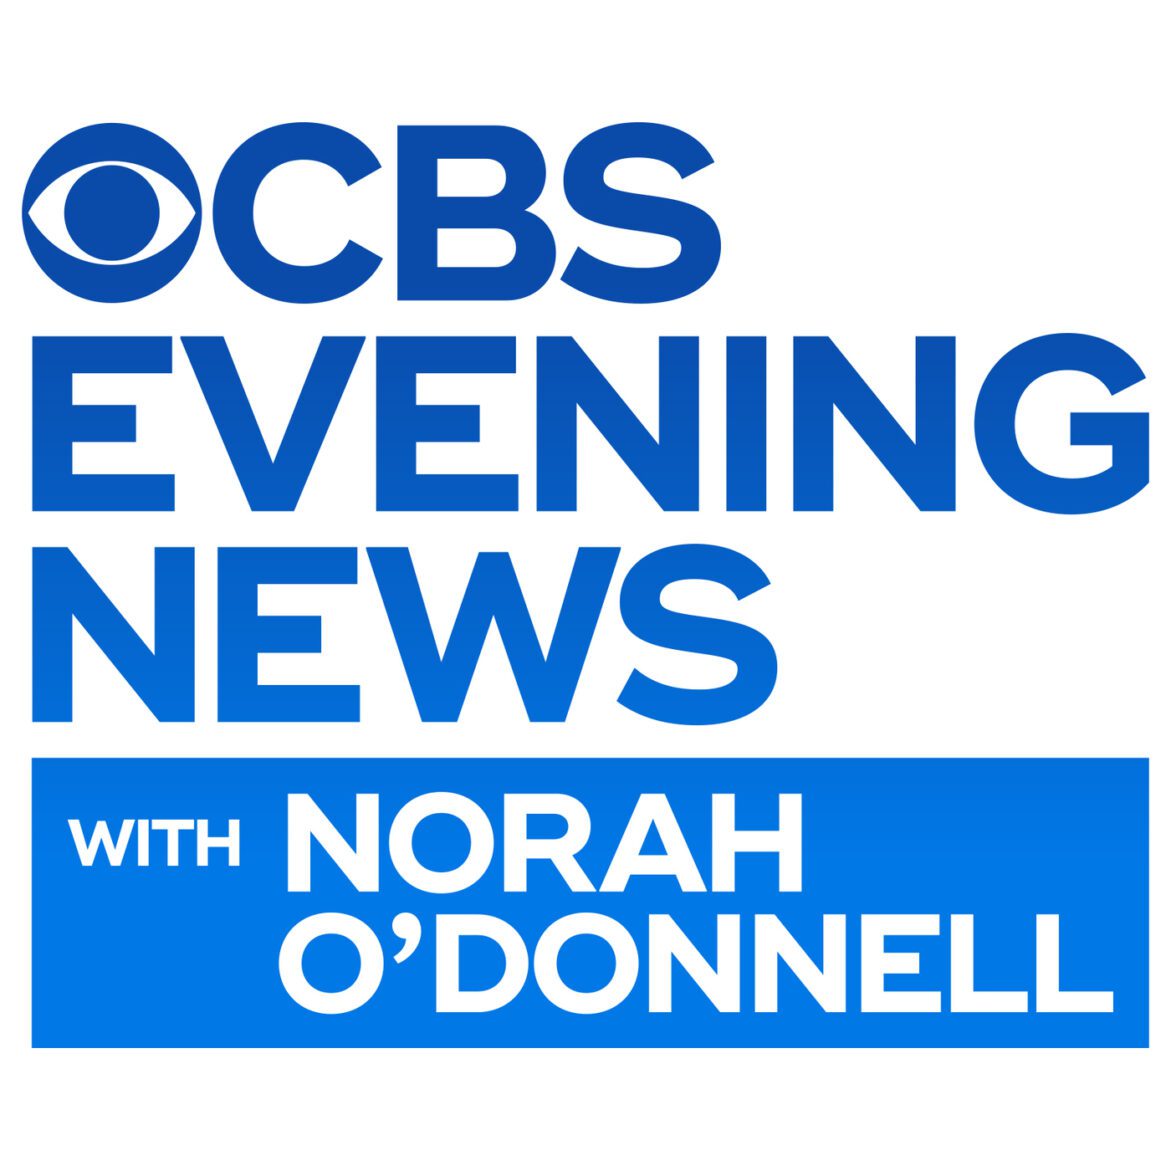 Black Podcasting - CBS Evening News with Norah O'Donnell, 1/18